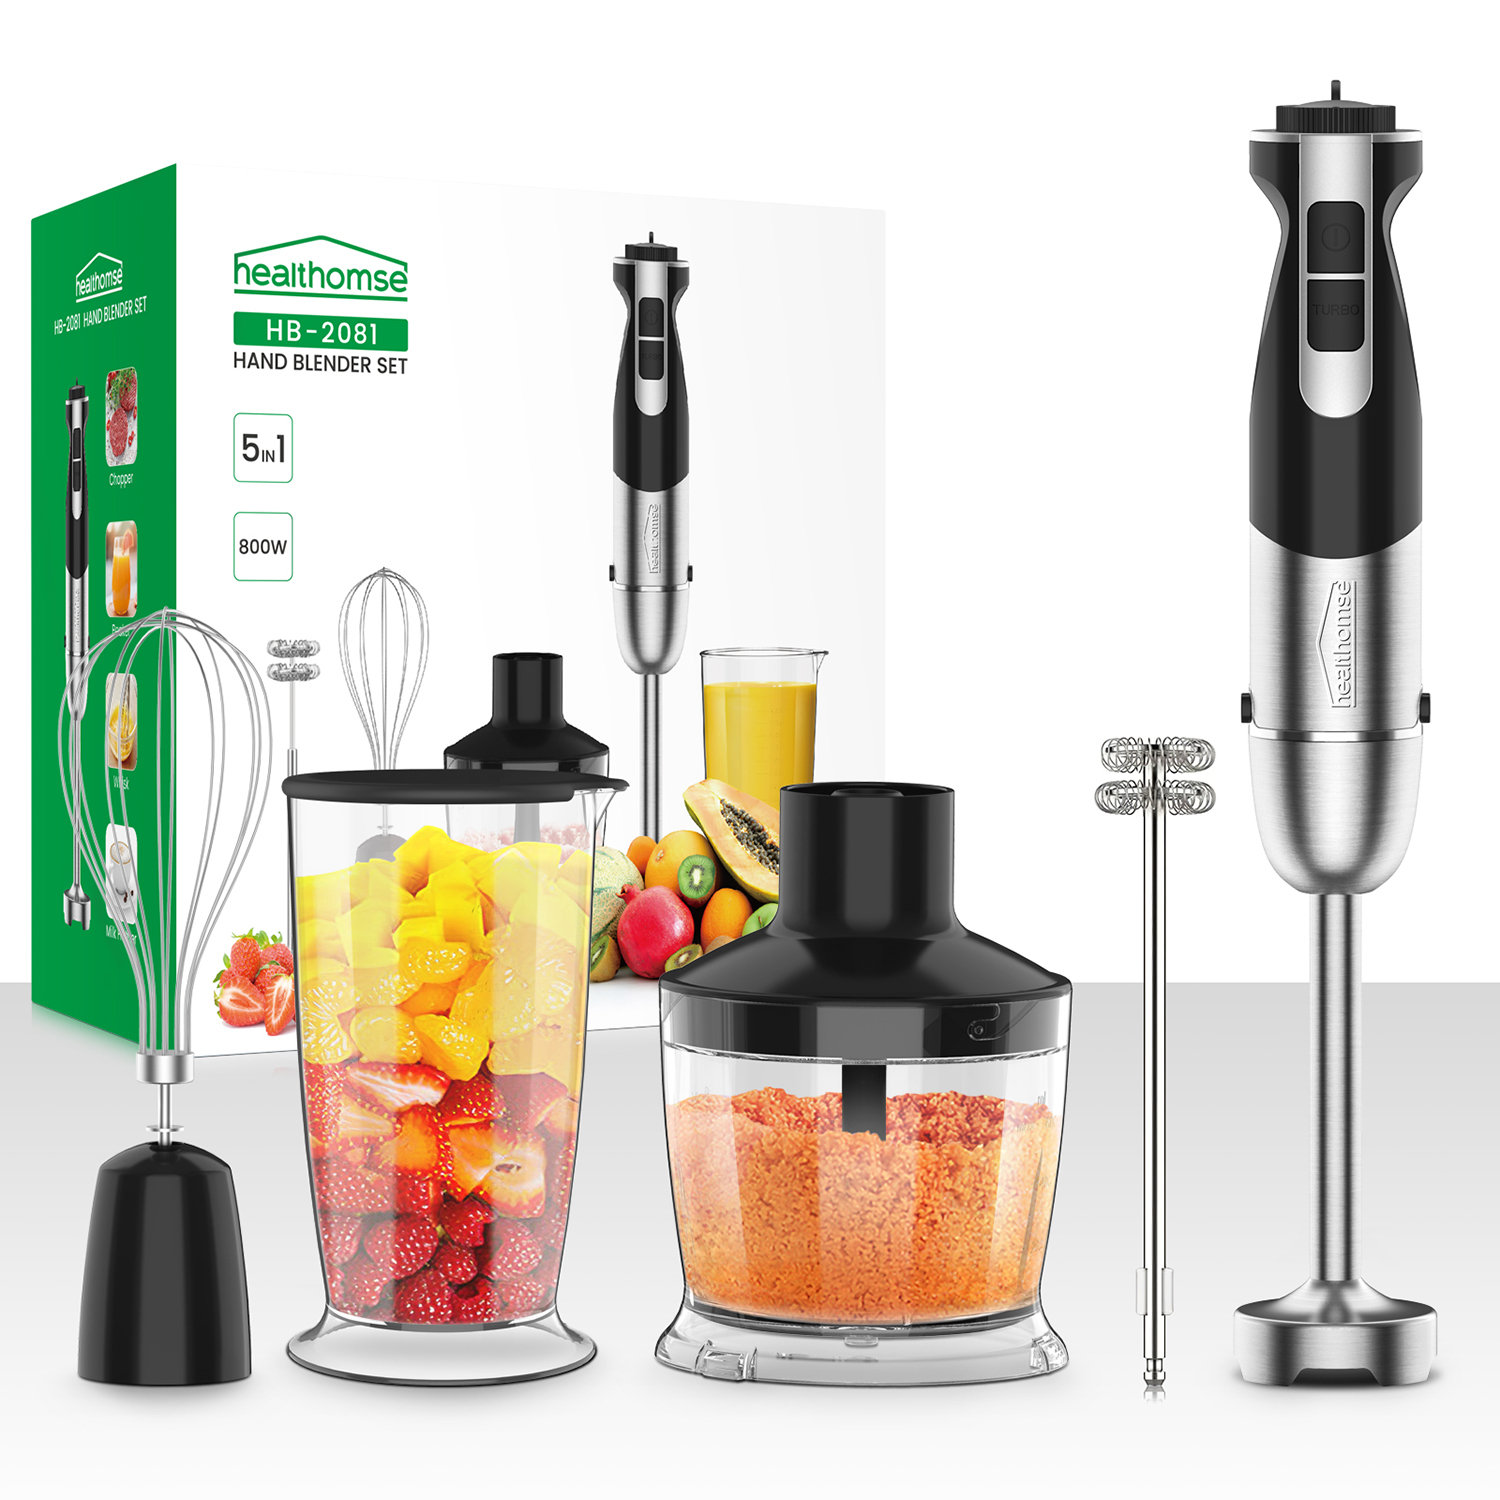 Guokeying 12 Speed Hand Immersion Blender